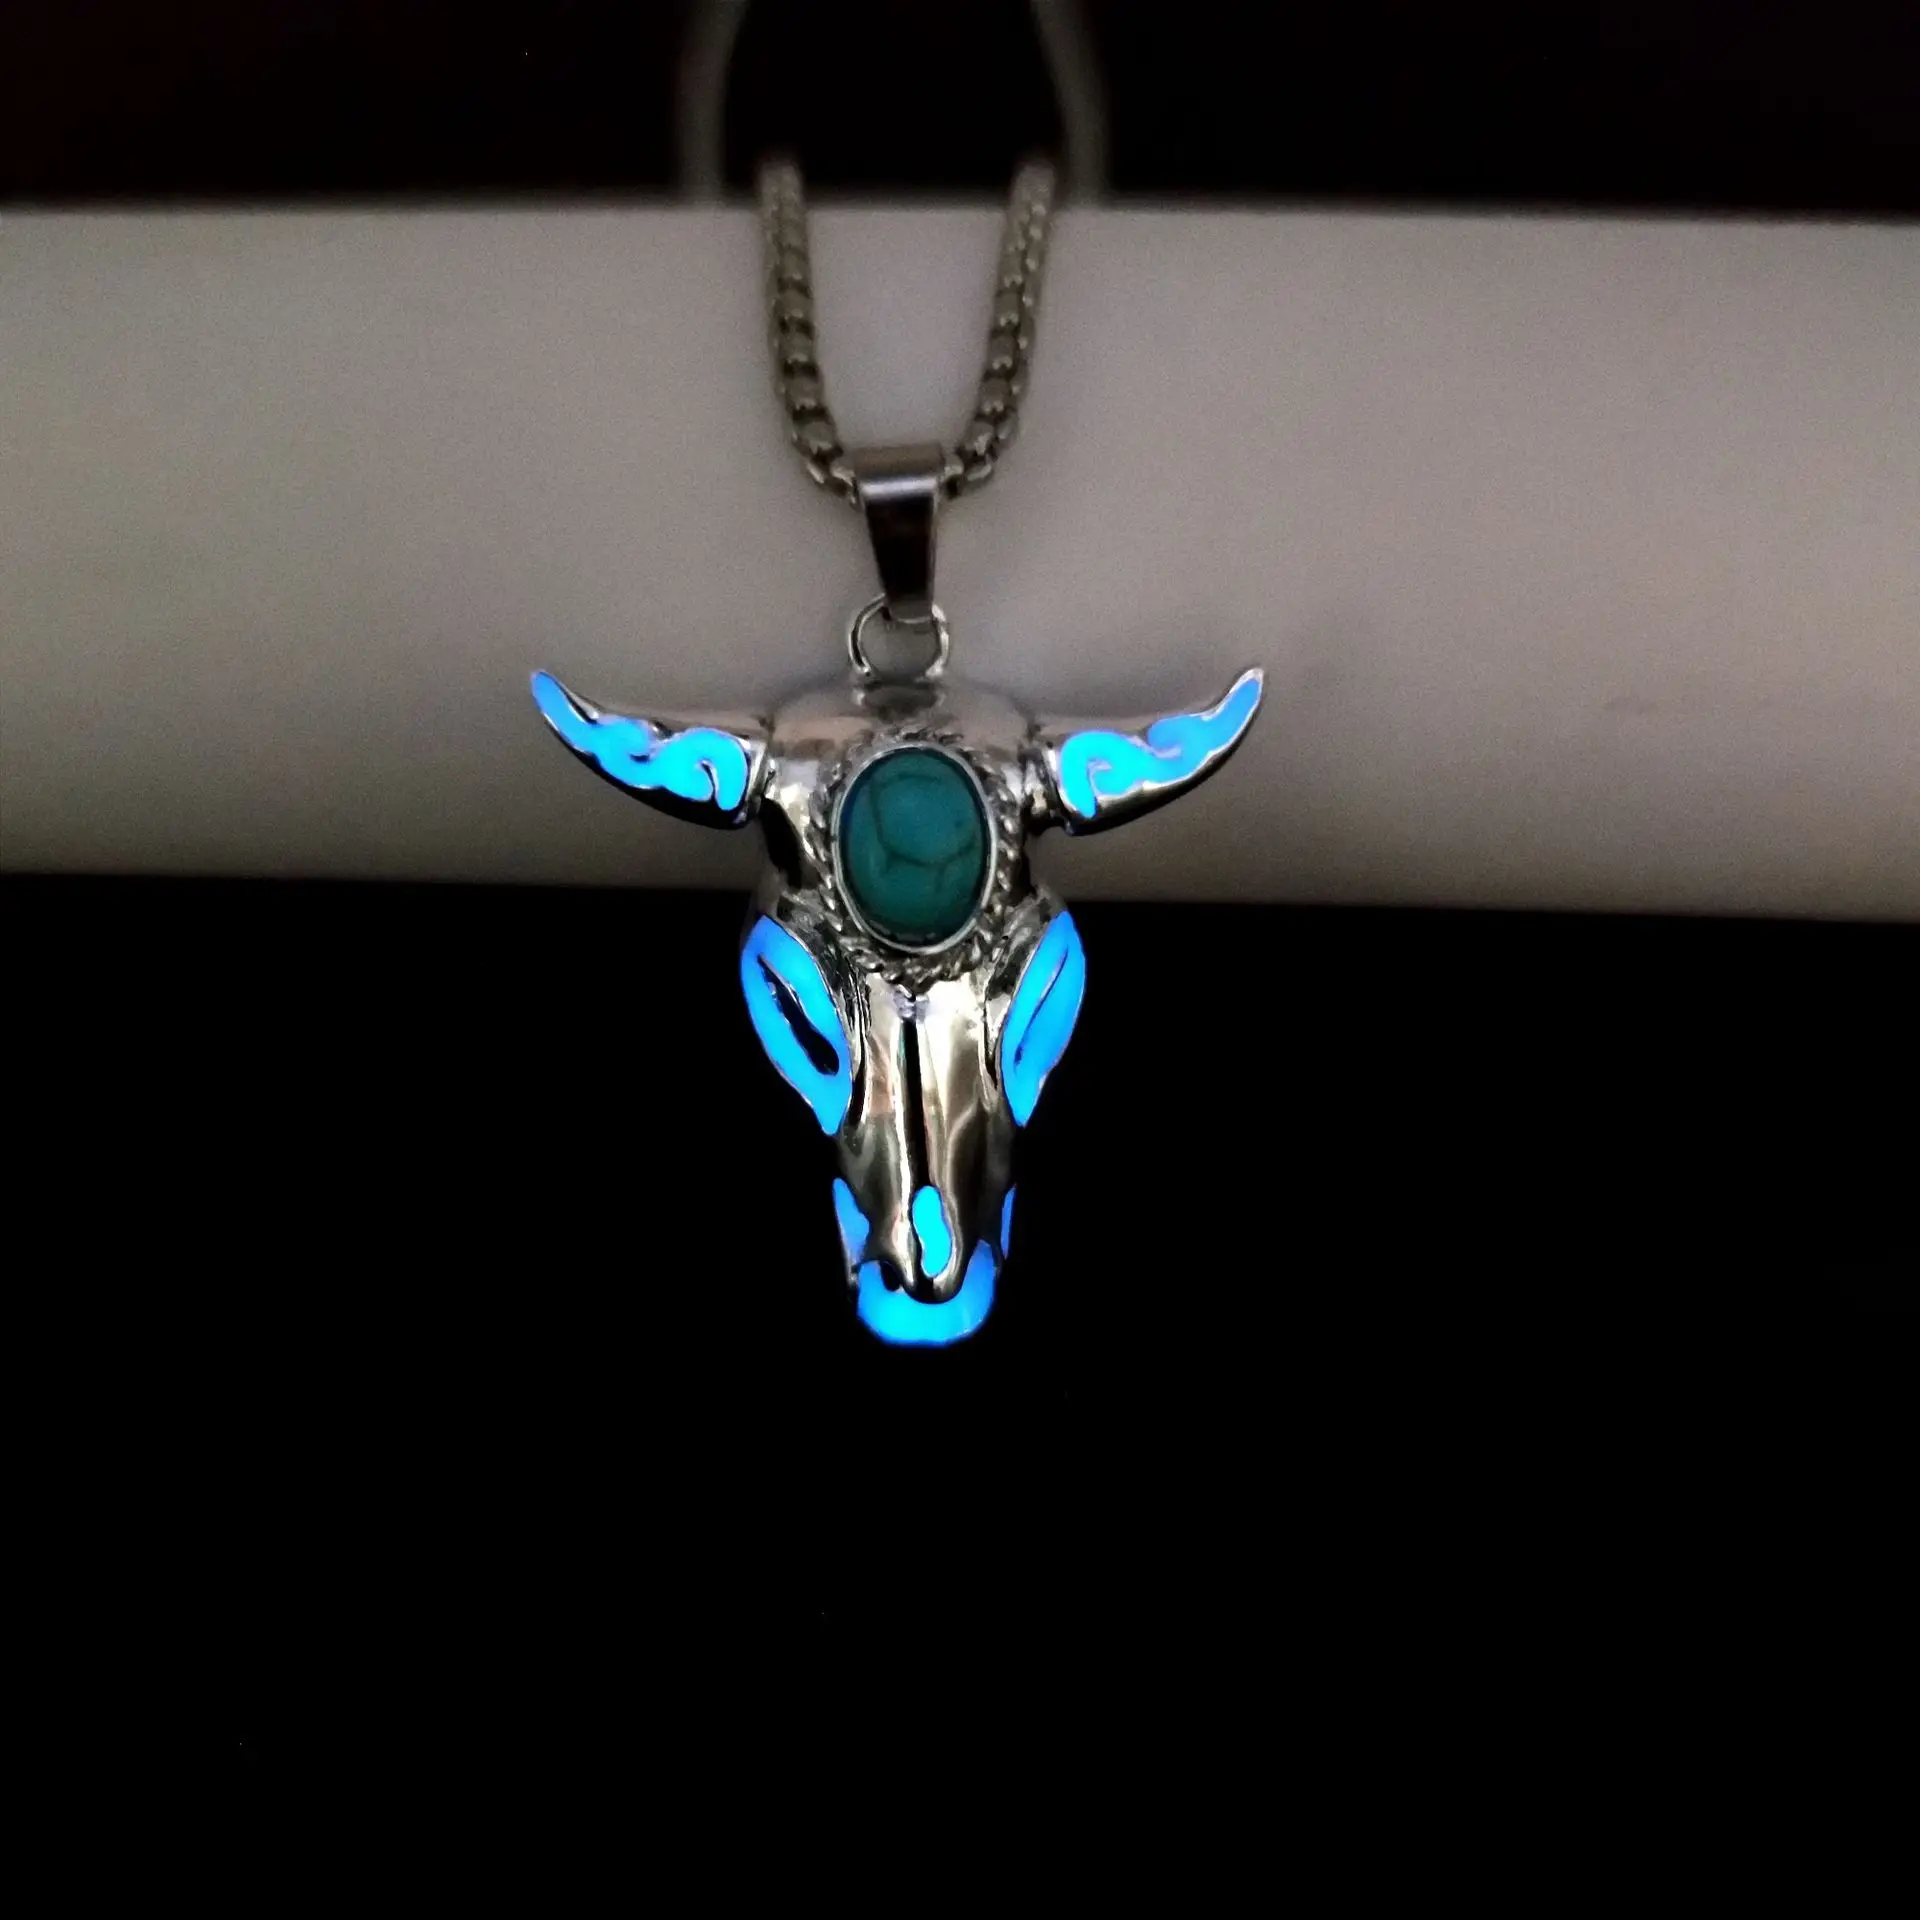 

Night Luminous Skull Bull Head Necklace Men Jewelry Stainless steel chain Glow In The Dark Punk Skeleton Necklace For Women